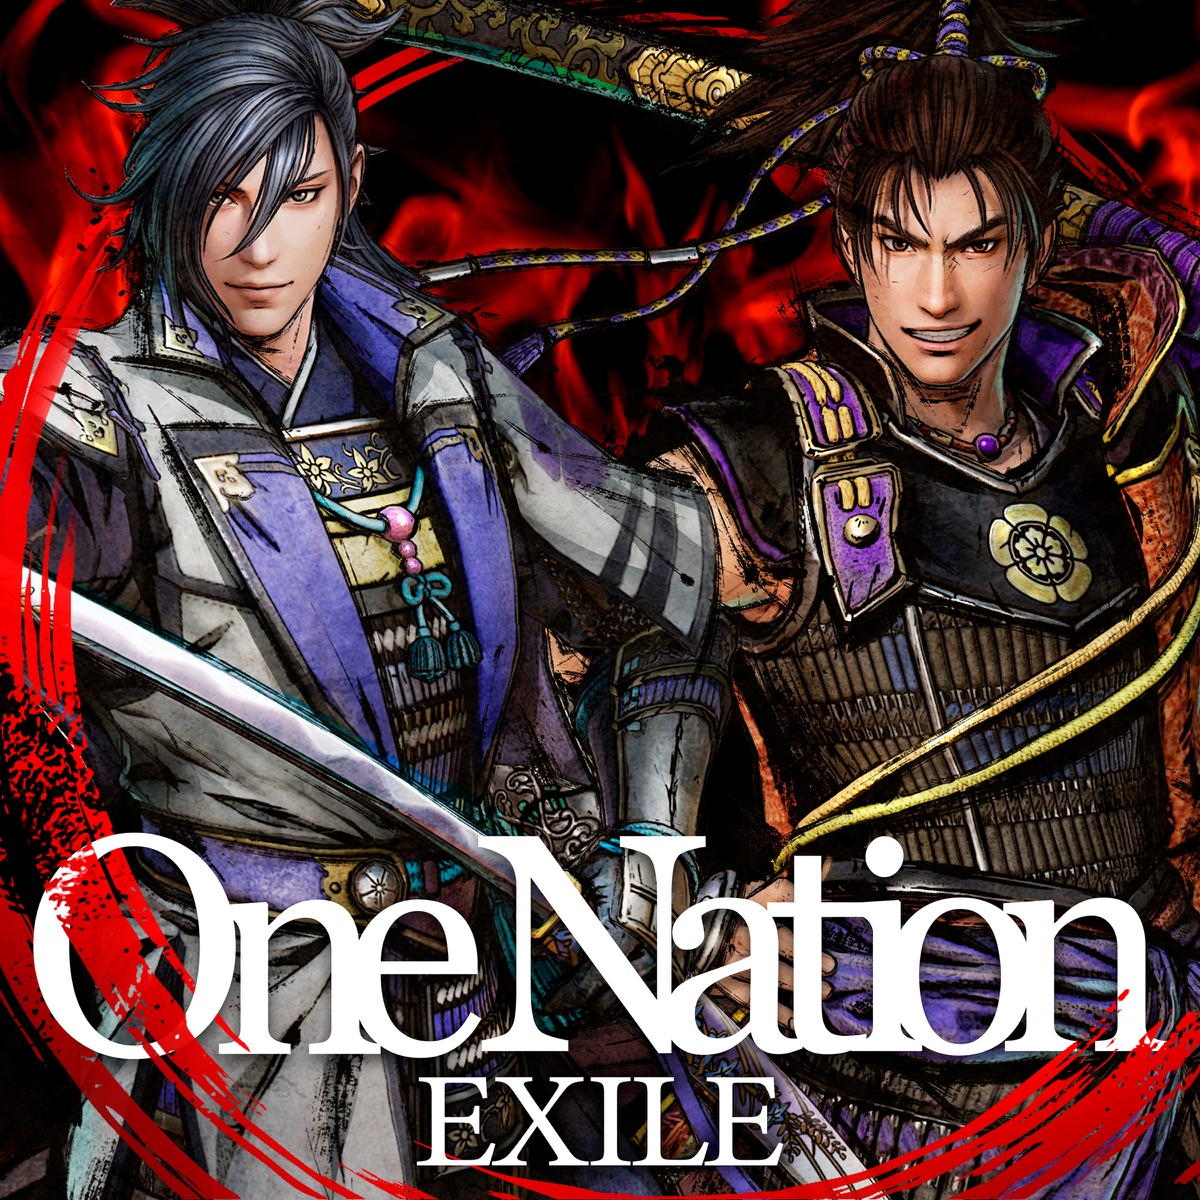 Cover art for『EXILE - One Nation』from the release『One Nation』